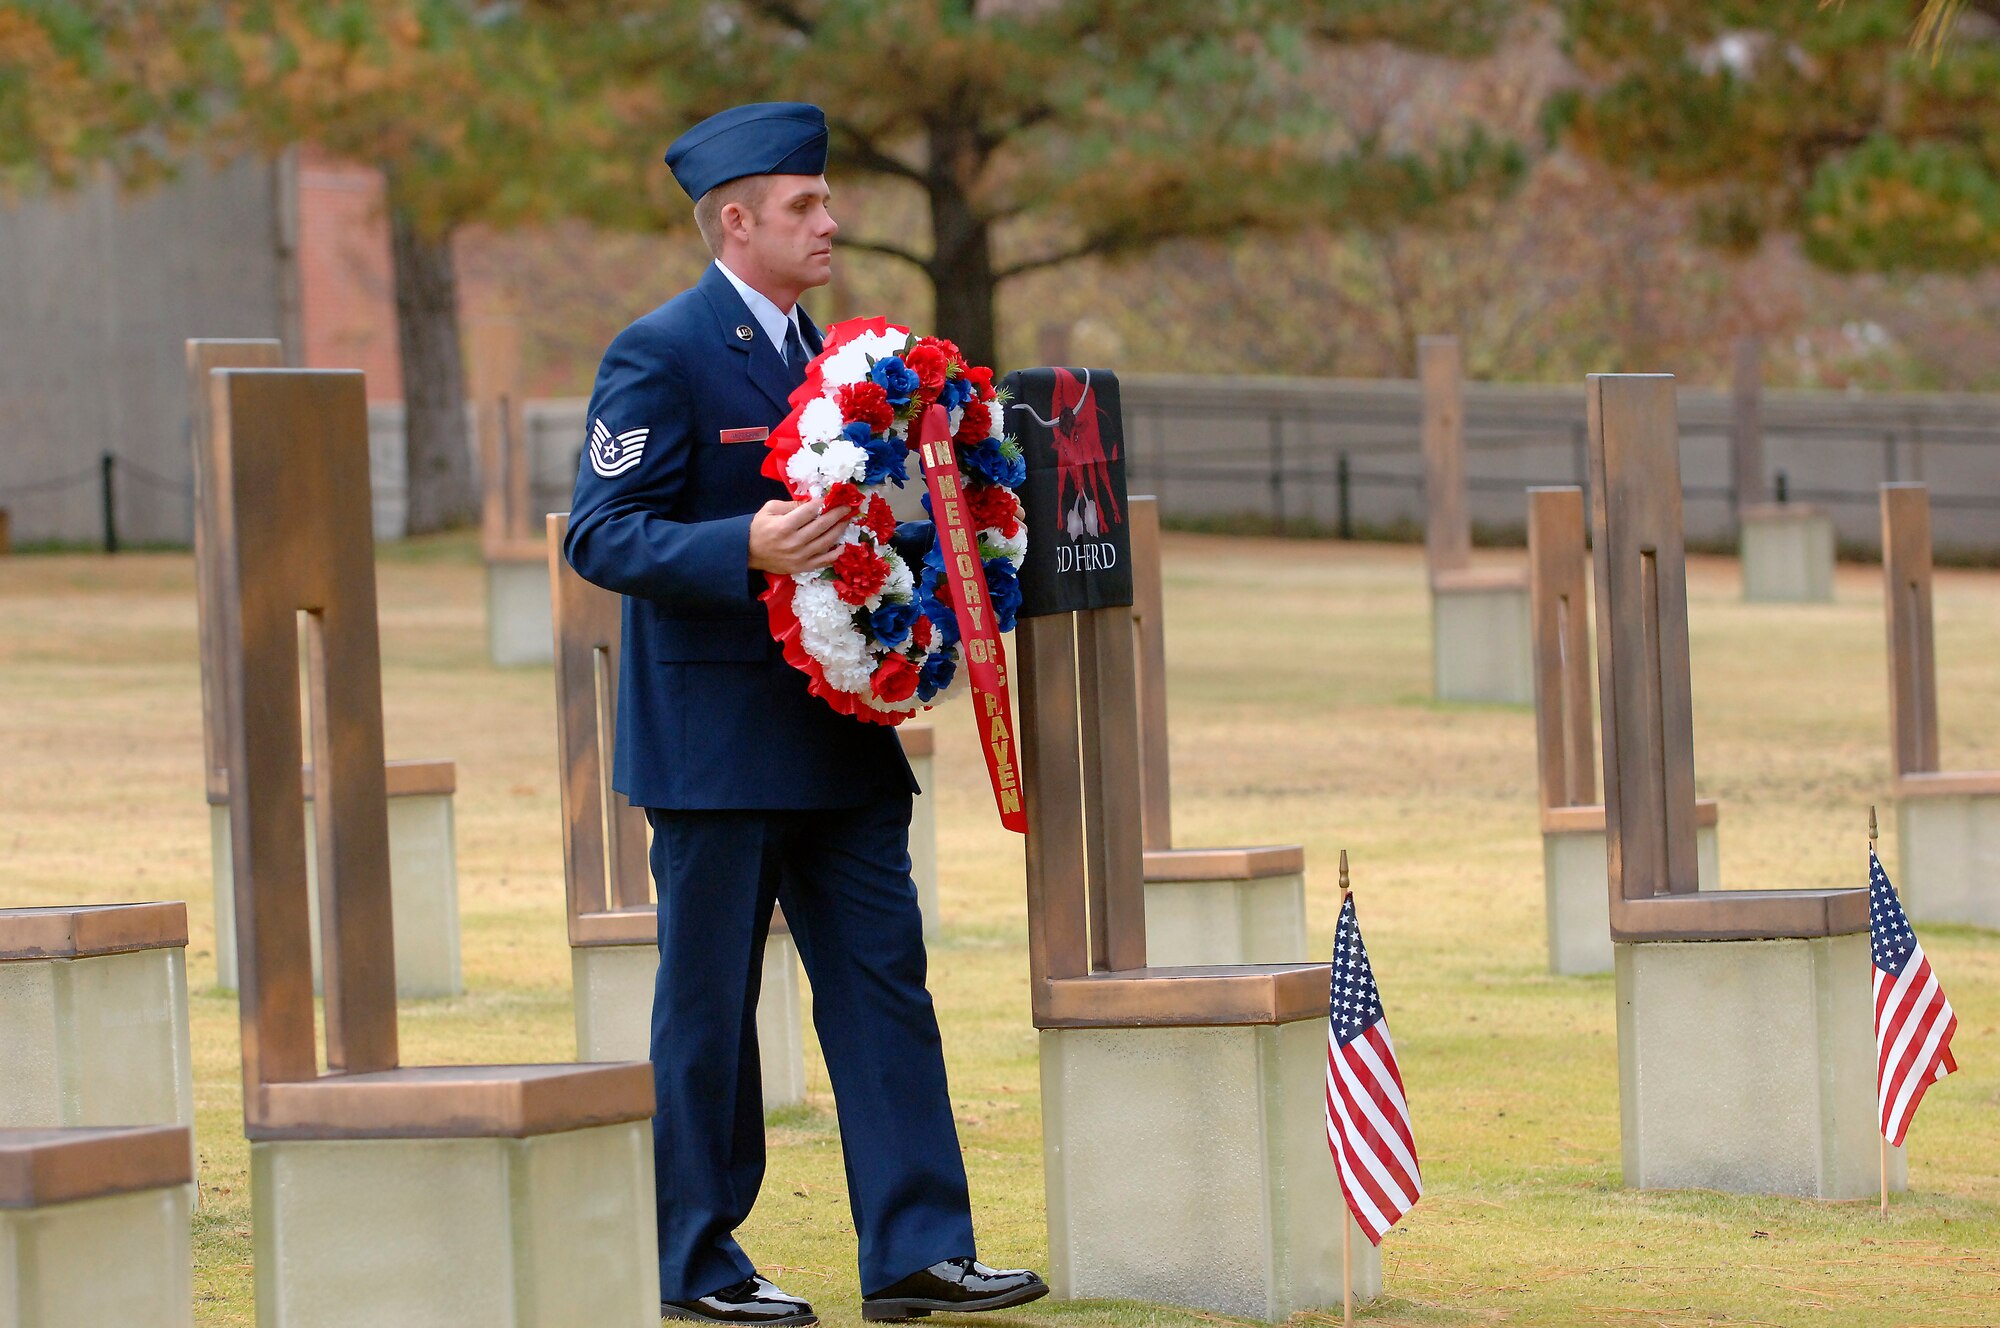 Tech Sgt. Jeffrey Anderson, 32nd Combat Communications Squadron, wreath-bearer for Airman 1st Class Cartney Jean McRaven, moves toward the memorial chair for Airman McRaven during the Veterans Day wreath laying ceremony at the Oklahoma City National Memorial. (Air Force photo by Dave Faytinger)